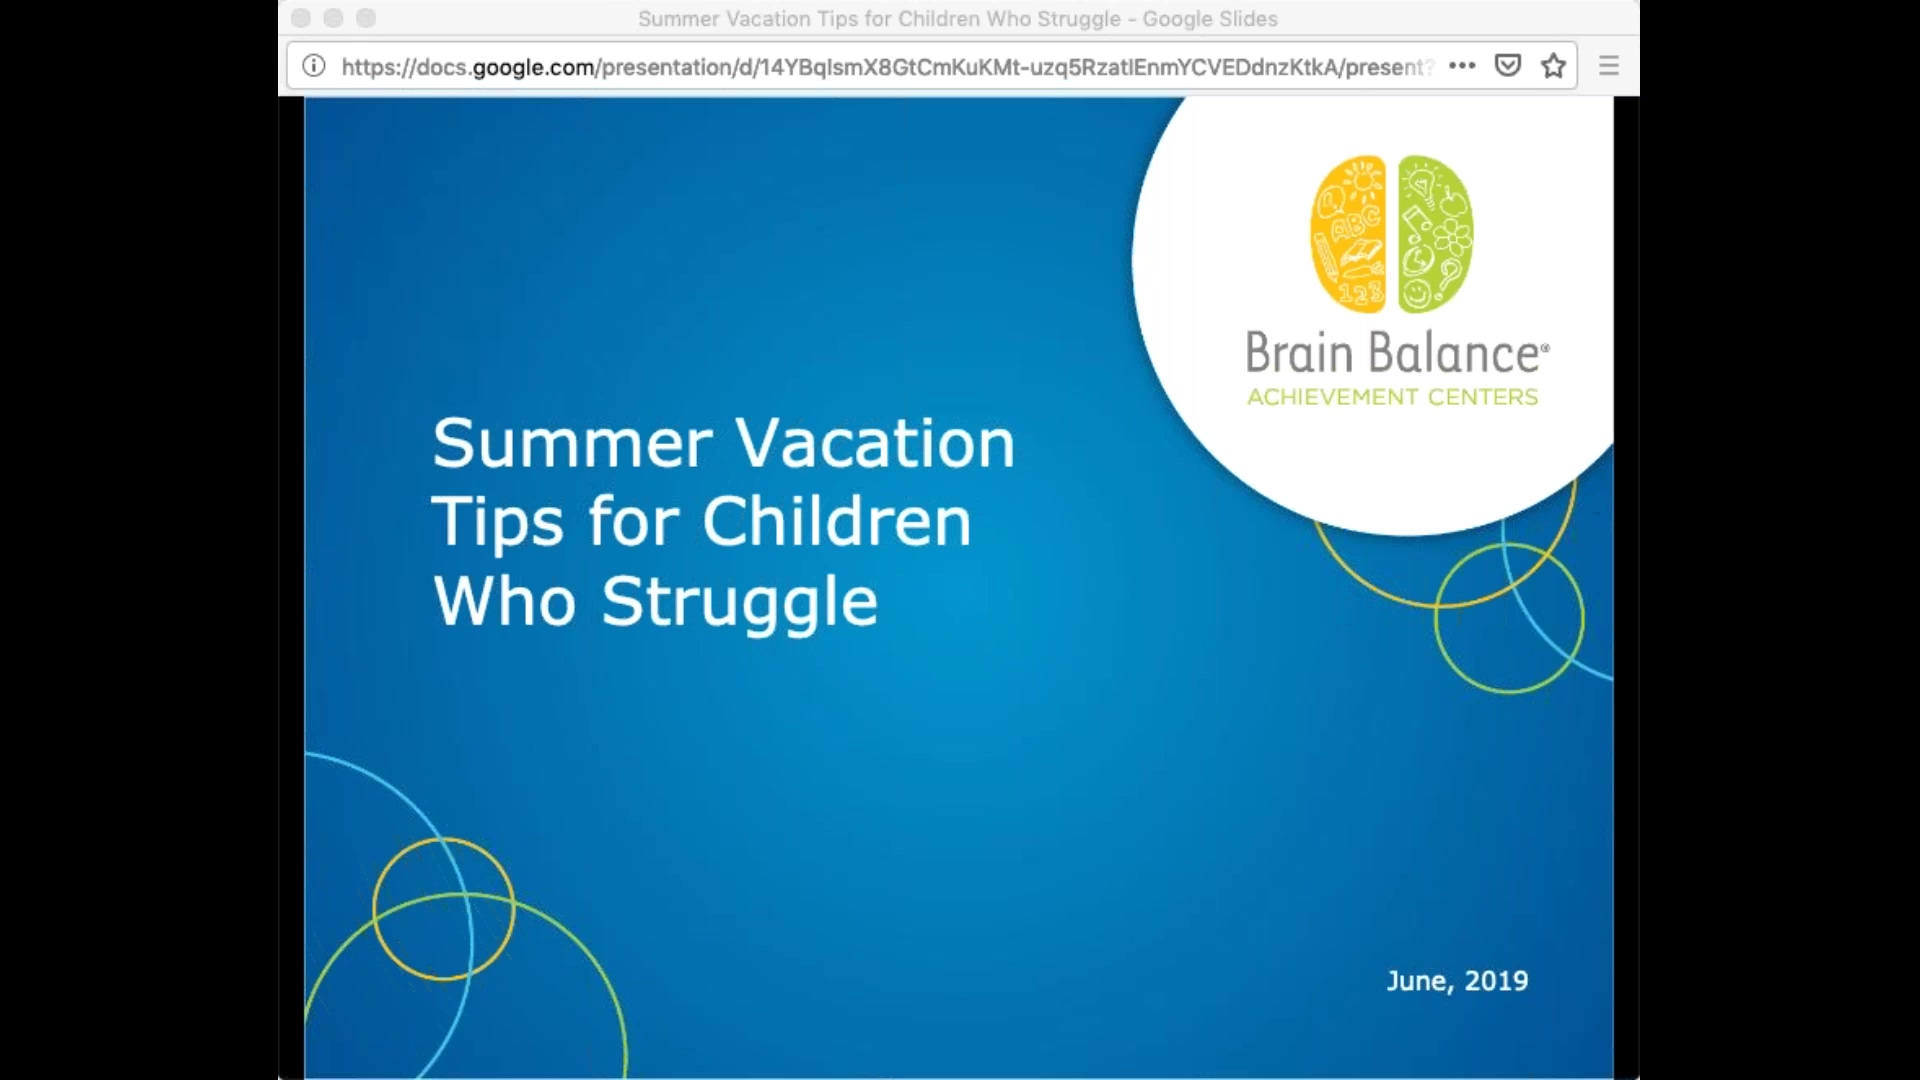 Summer Vacation Tips for Kids who Struggle